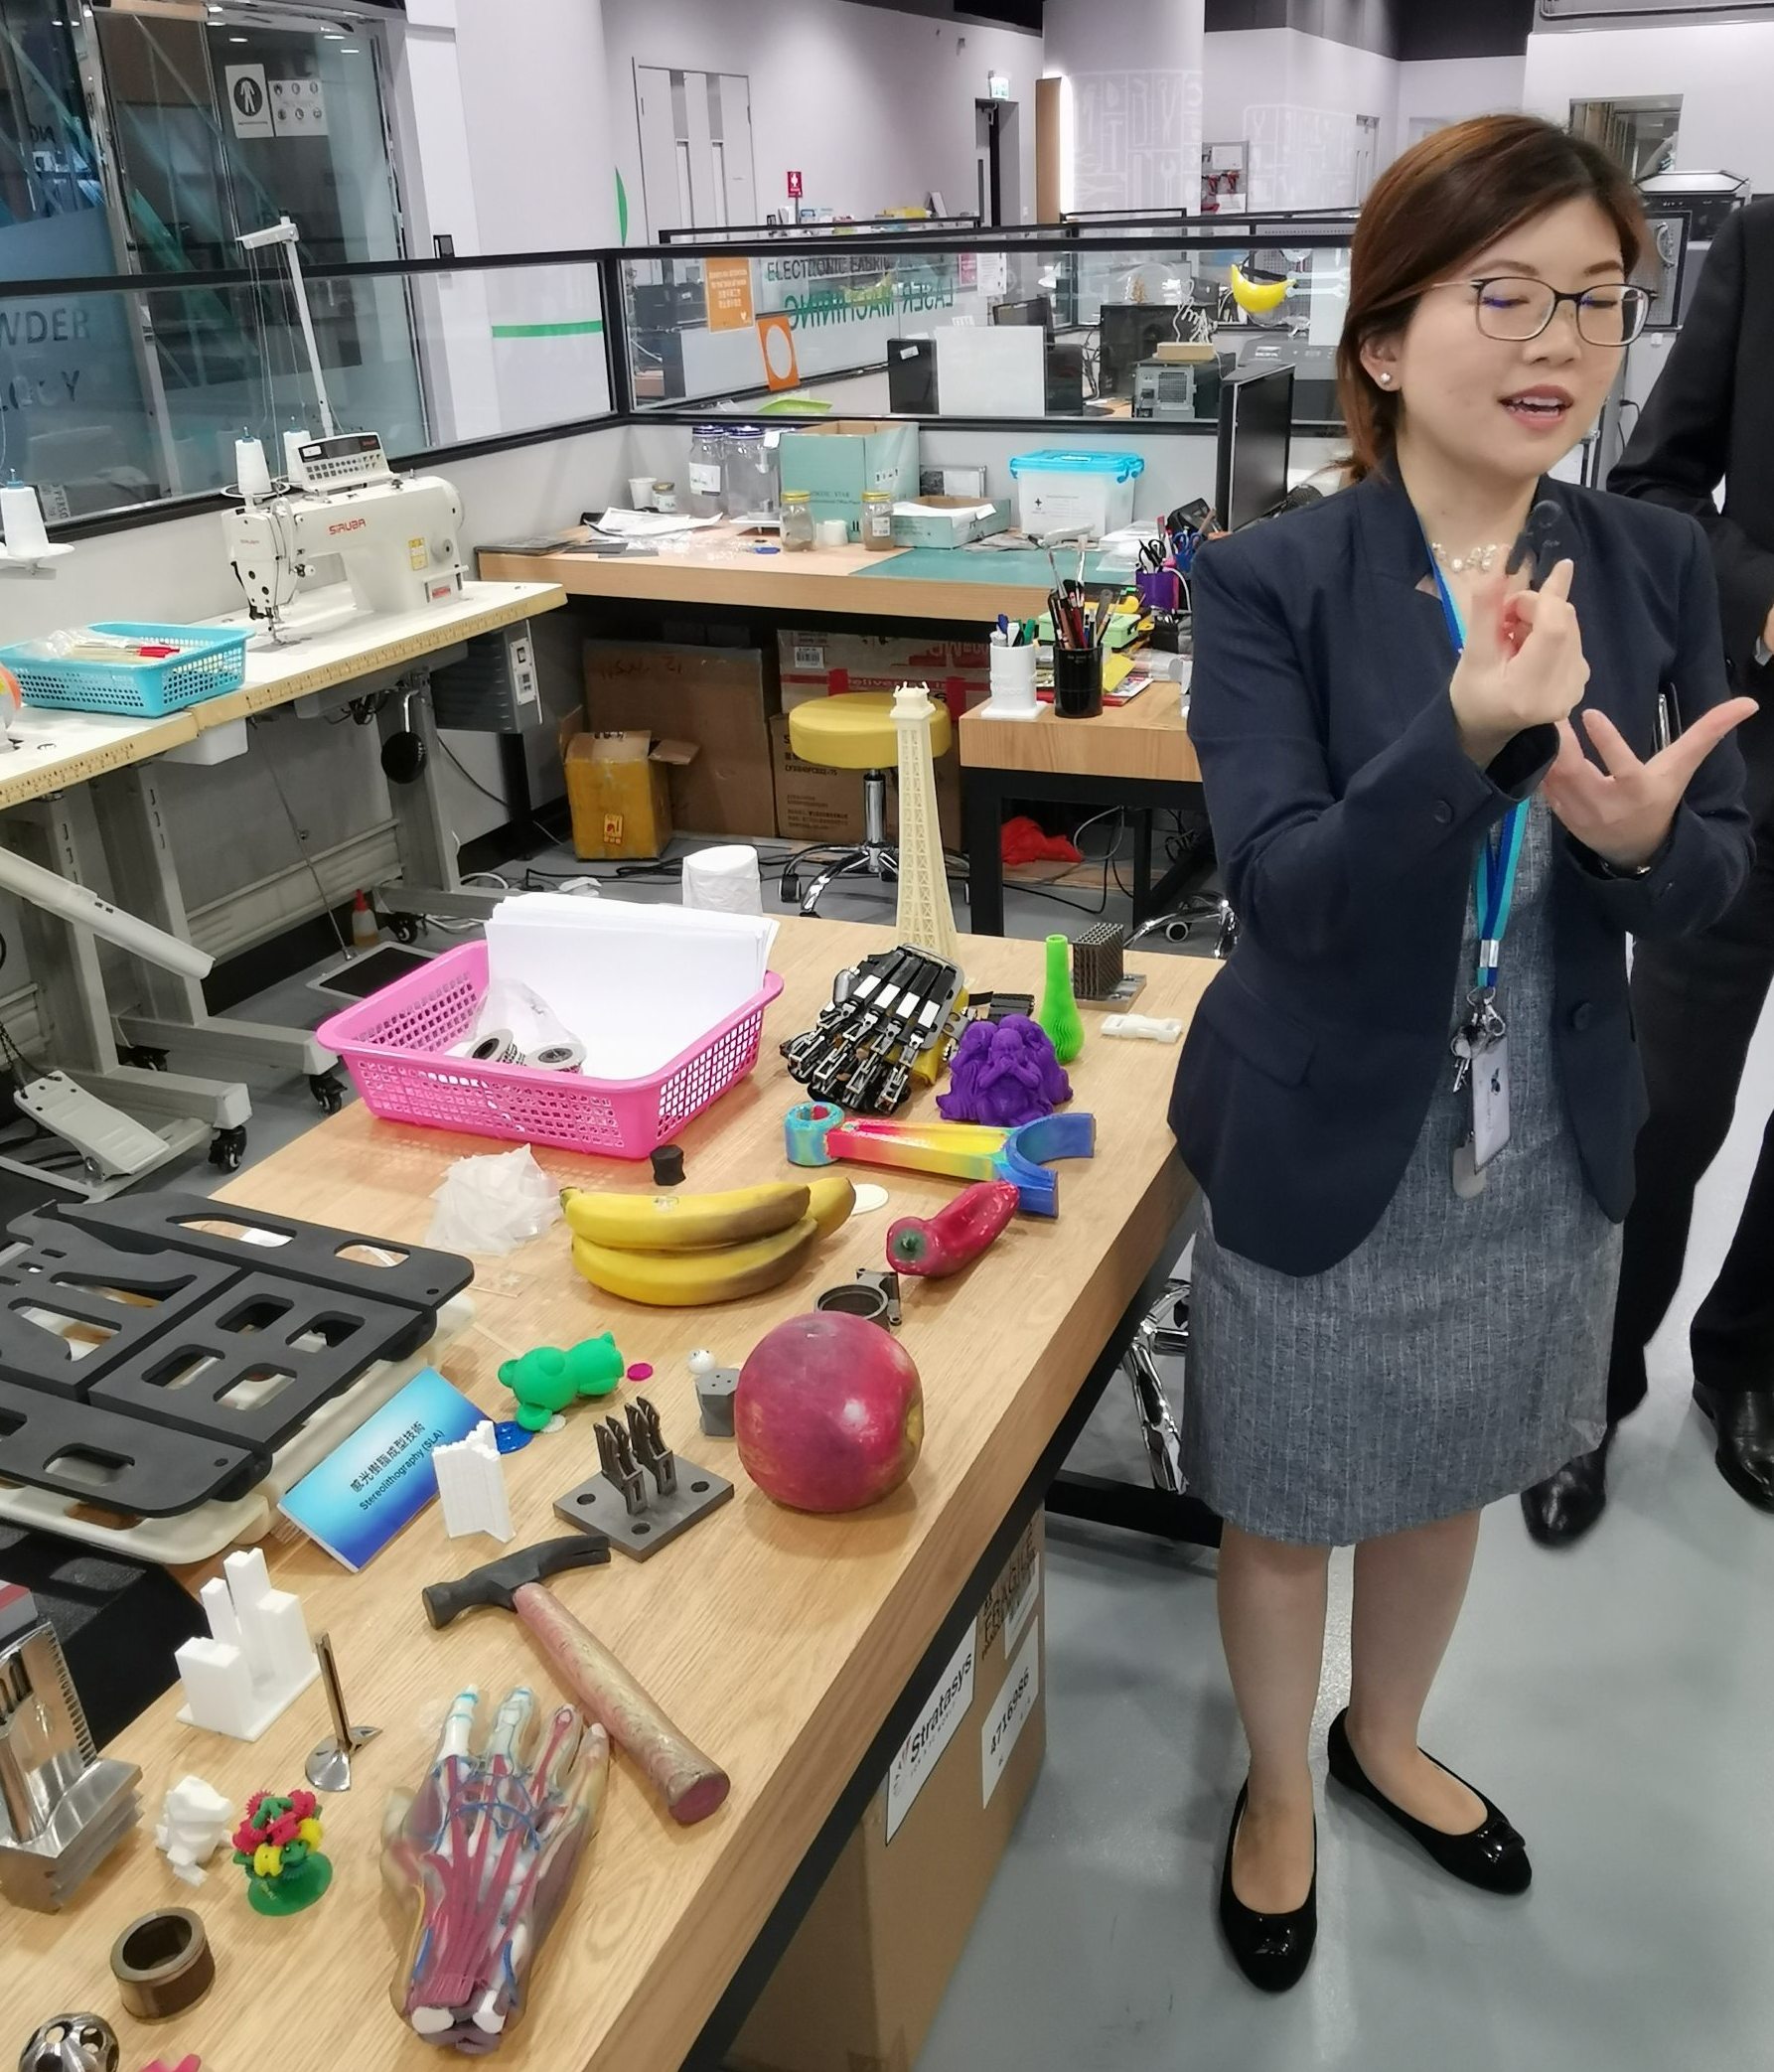 Stephanie Huang, manager of the community innovation unit at HKPC, shows some 3D printed items in a prototyping lab.